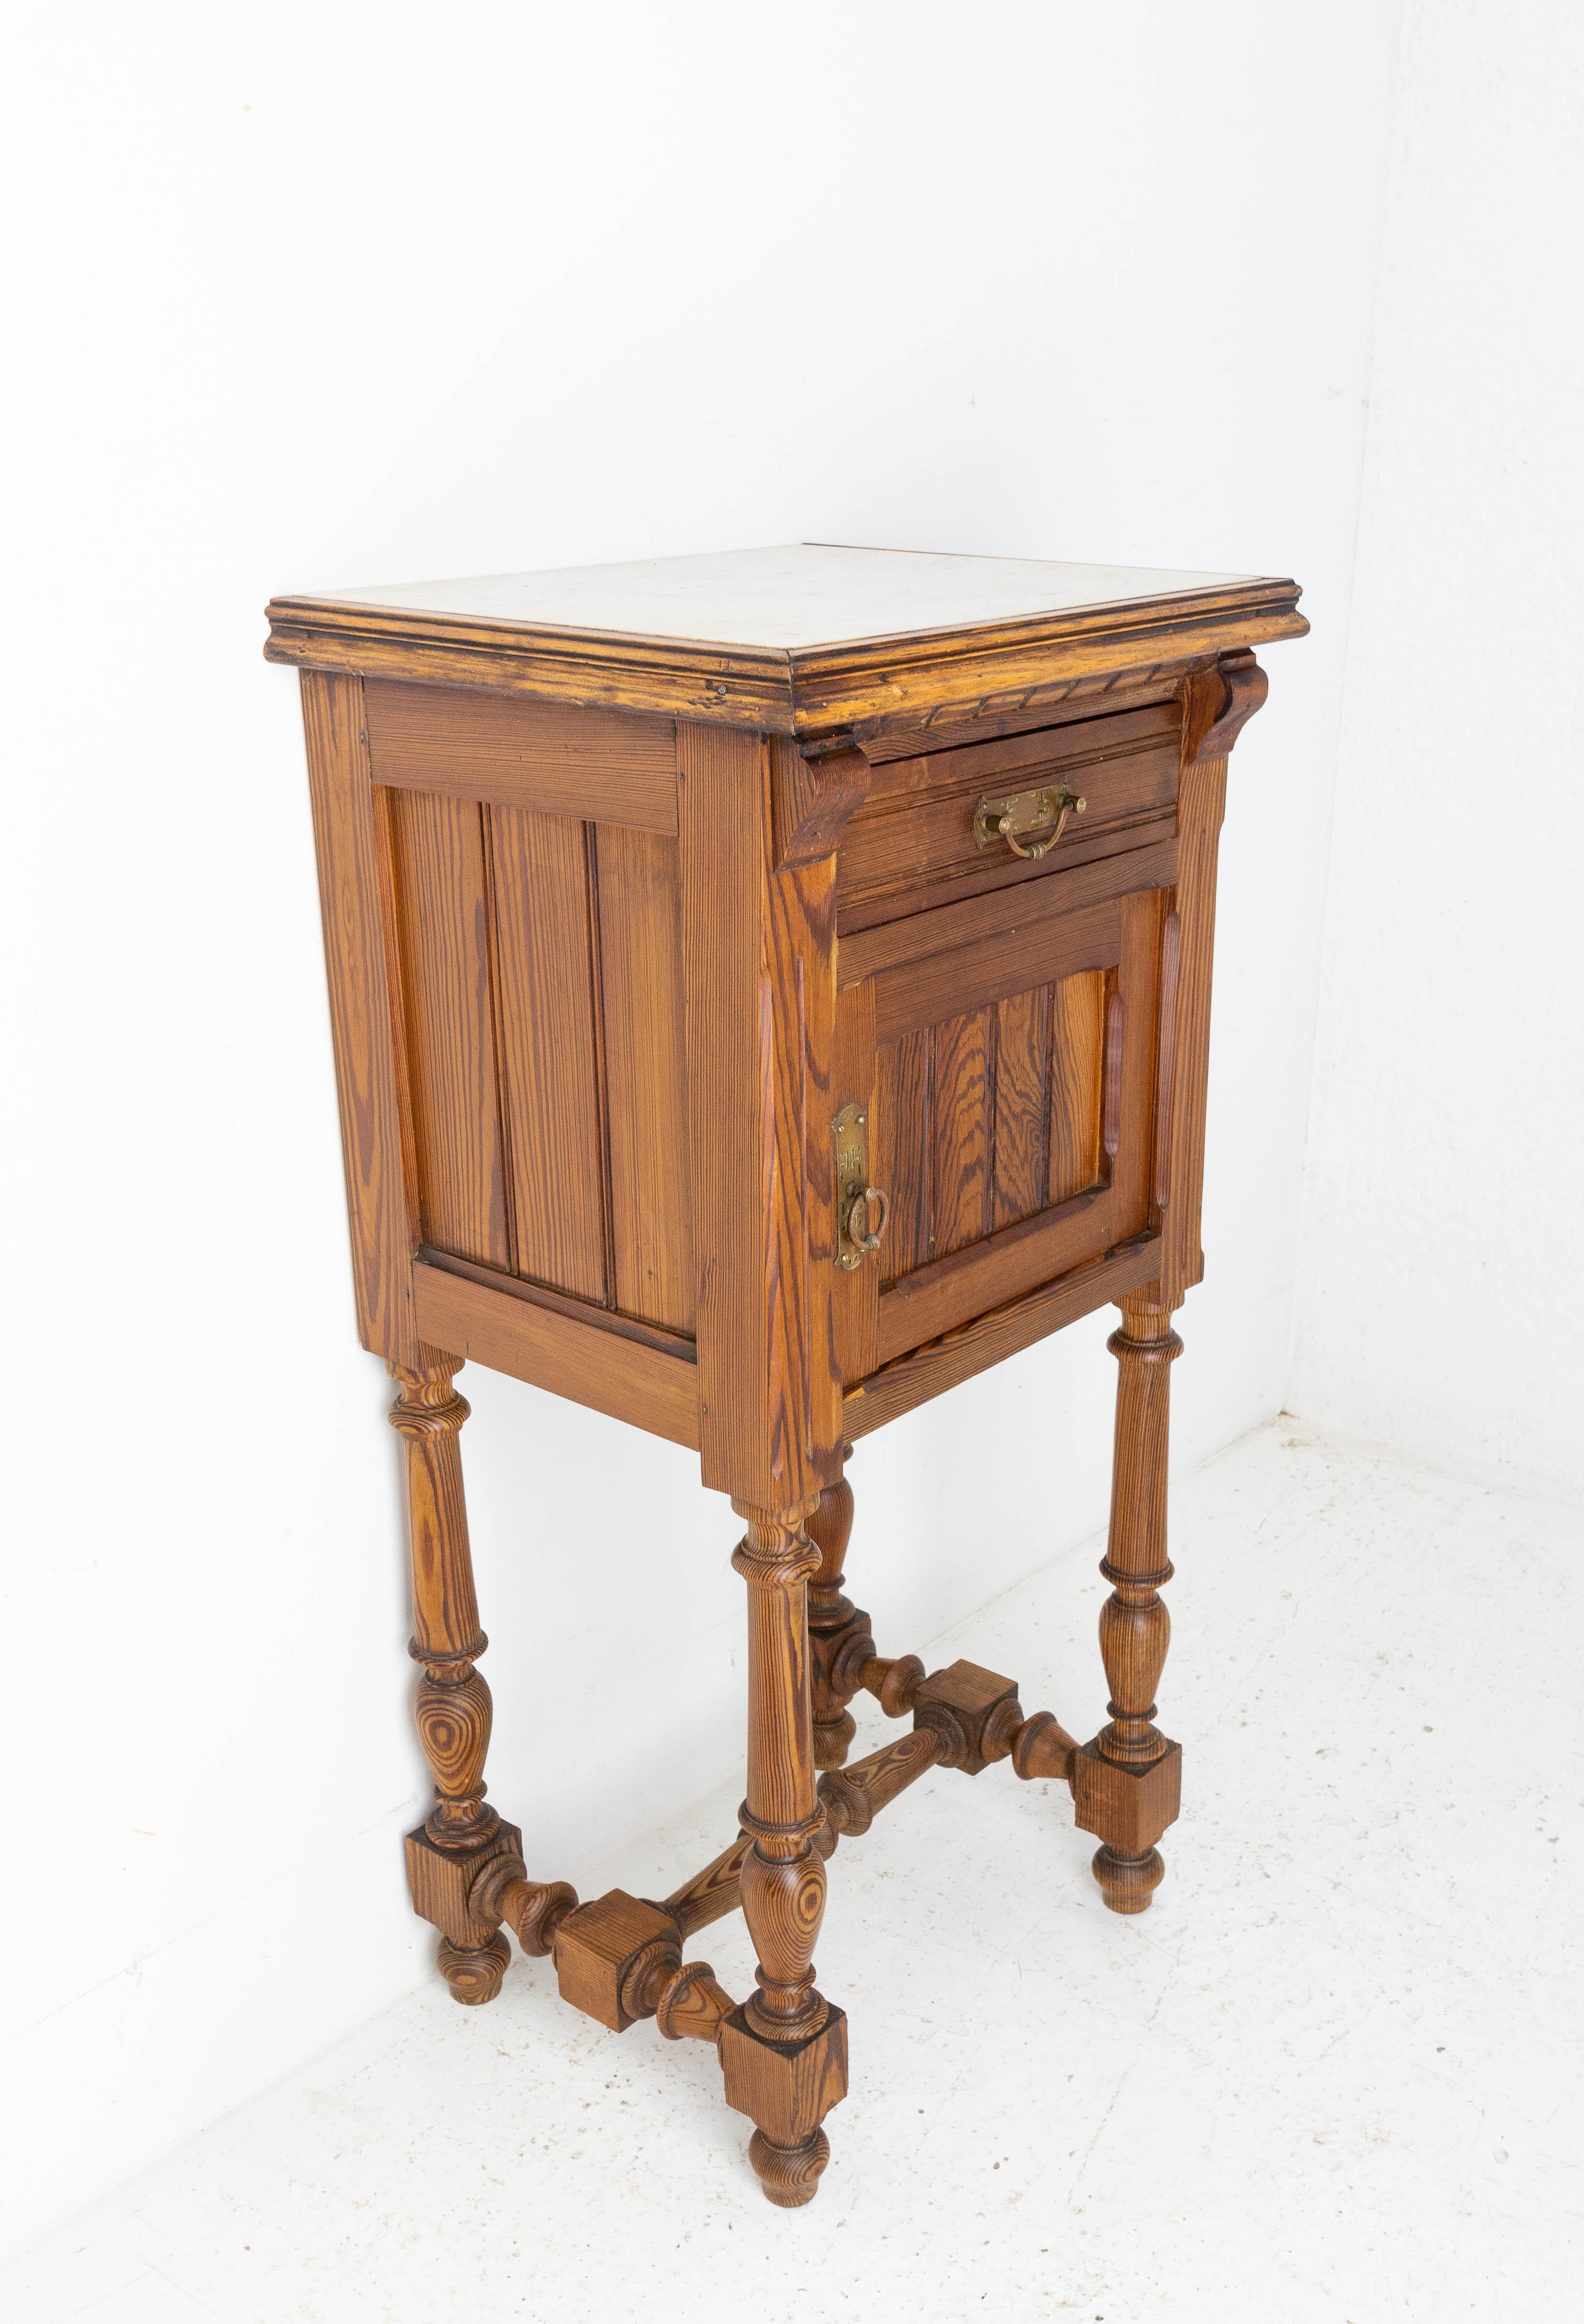 20th Century Art Nouveau Side Cabinet Nightstand French Bedside Table White Marble, C. 1910 For Sale